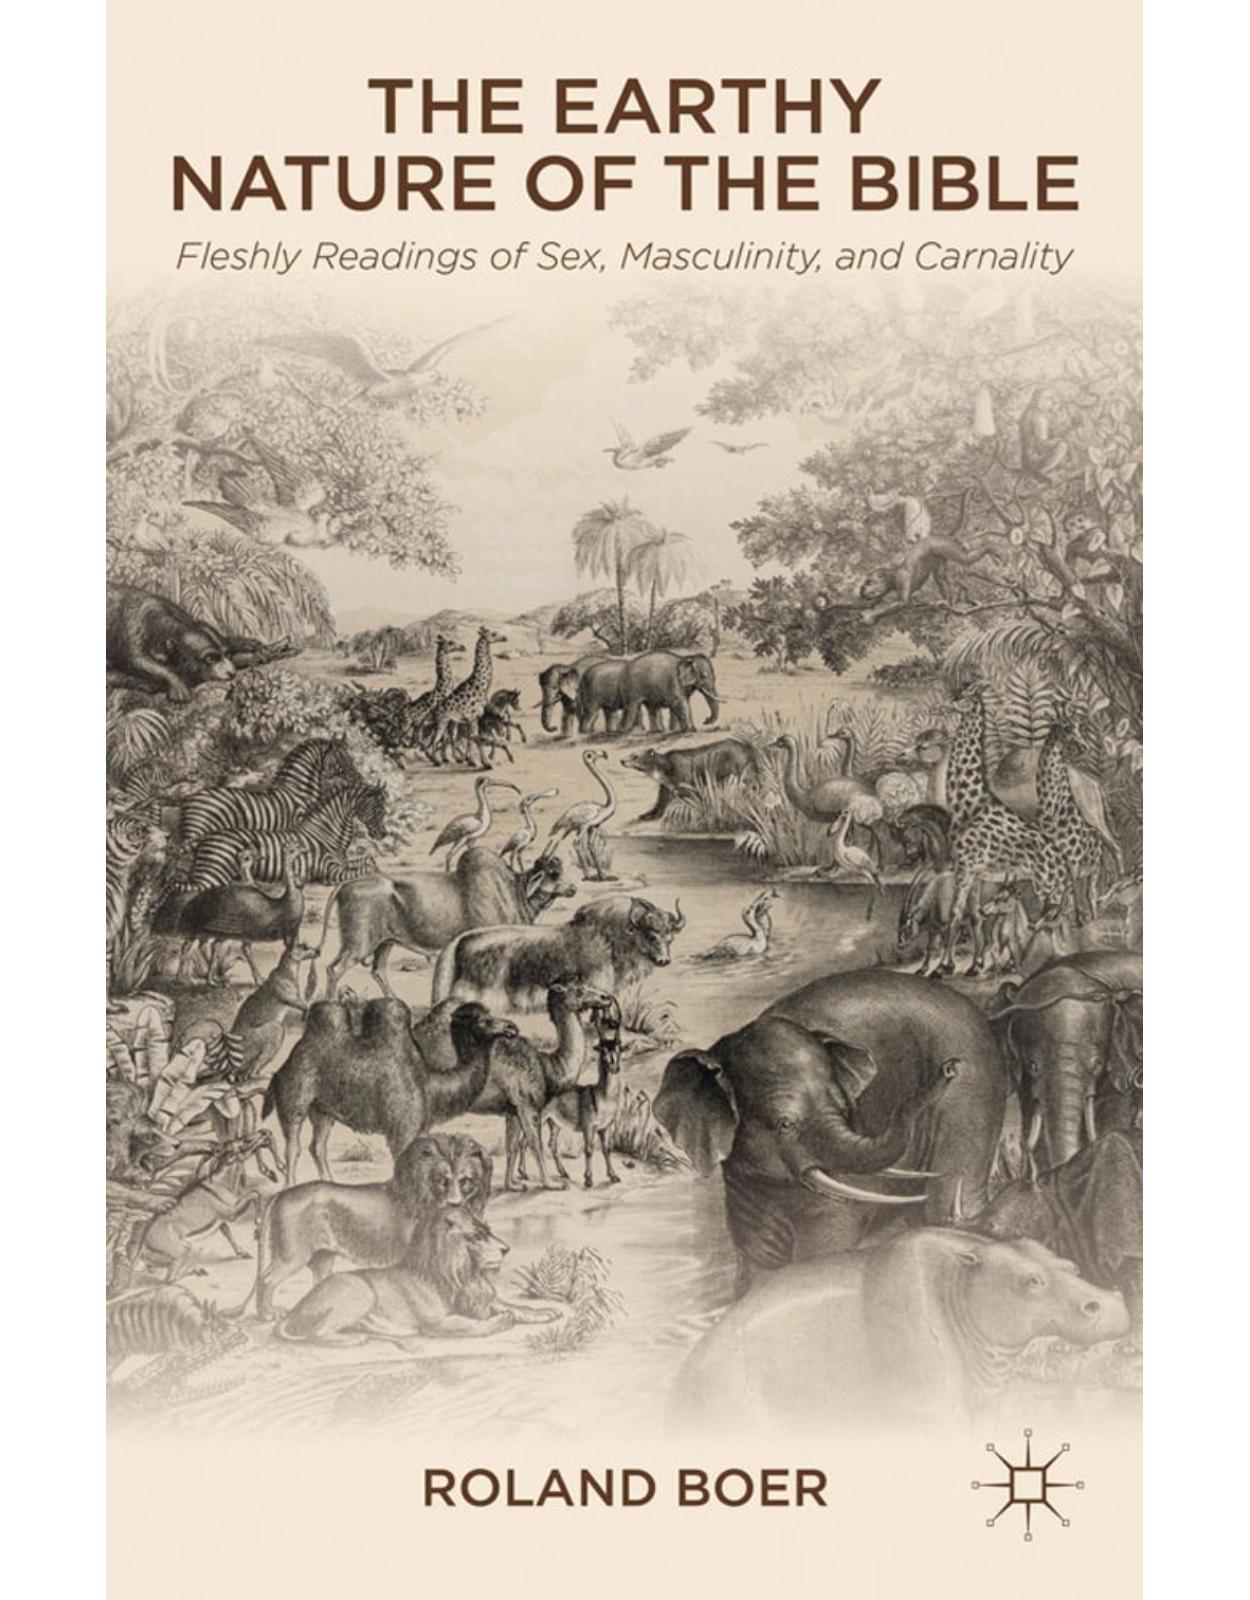 The Earthy Nature of the Bible: Fleshly Readings of Sex, Masculinity, and Carnality